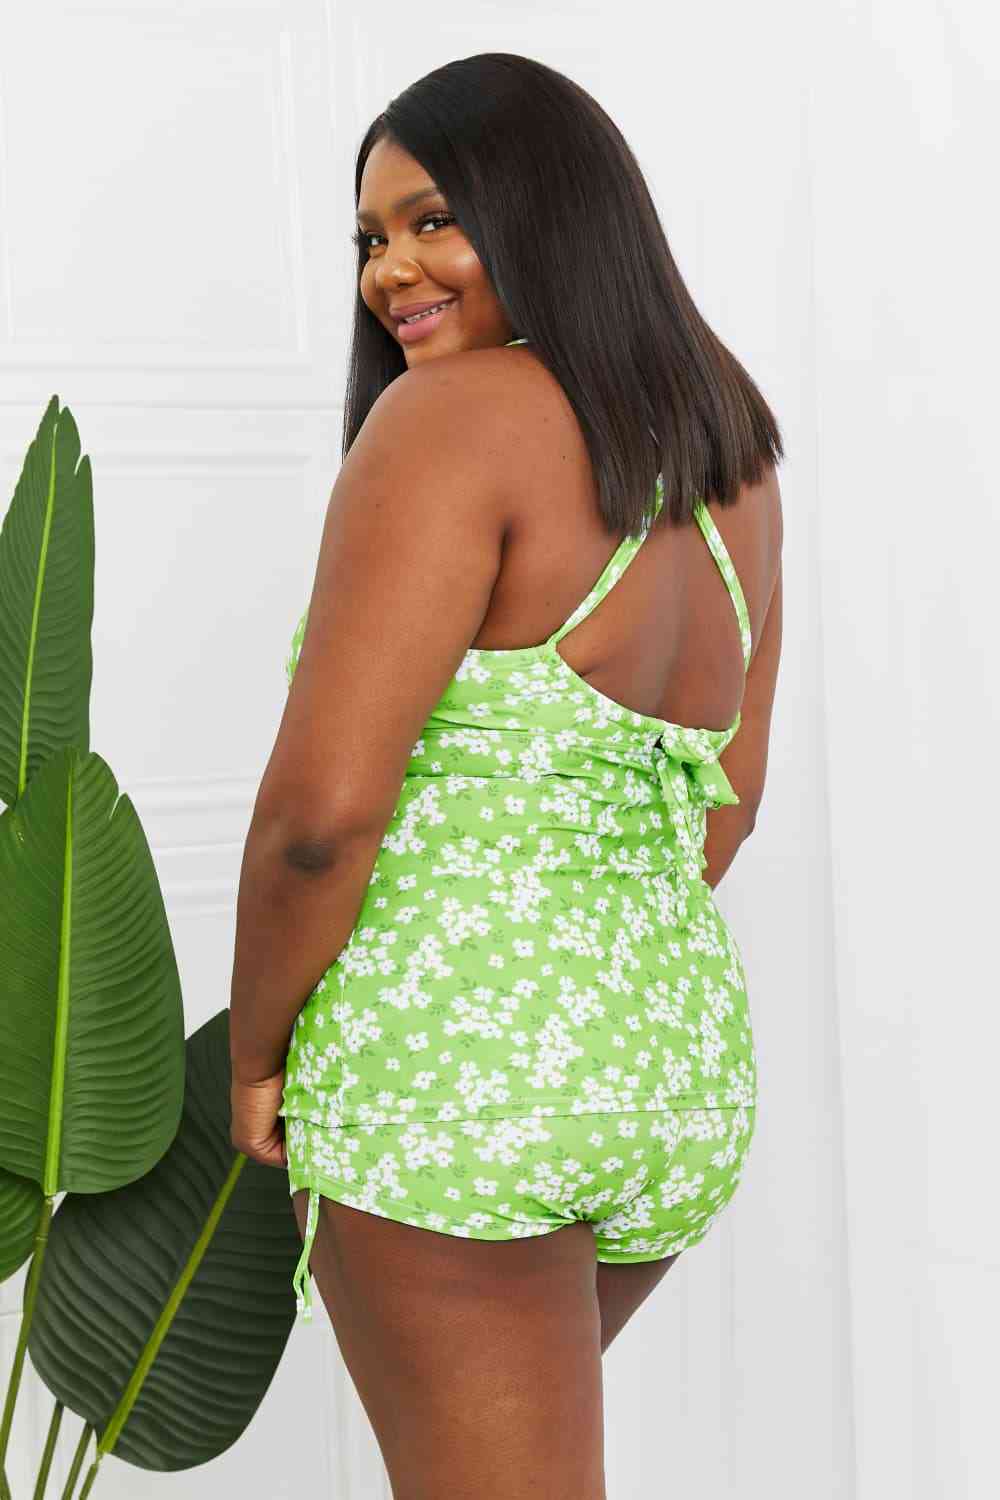 Women's Marina West Swim By The Shore Full Size Two-Piece Swimsuit in Blossom Green